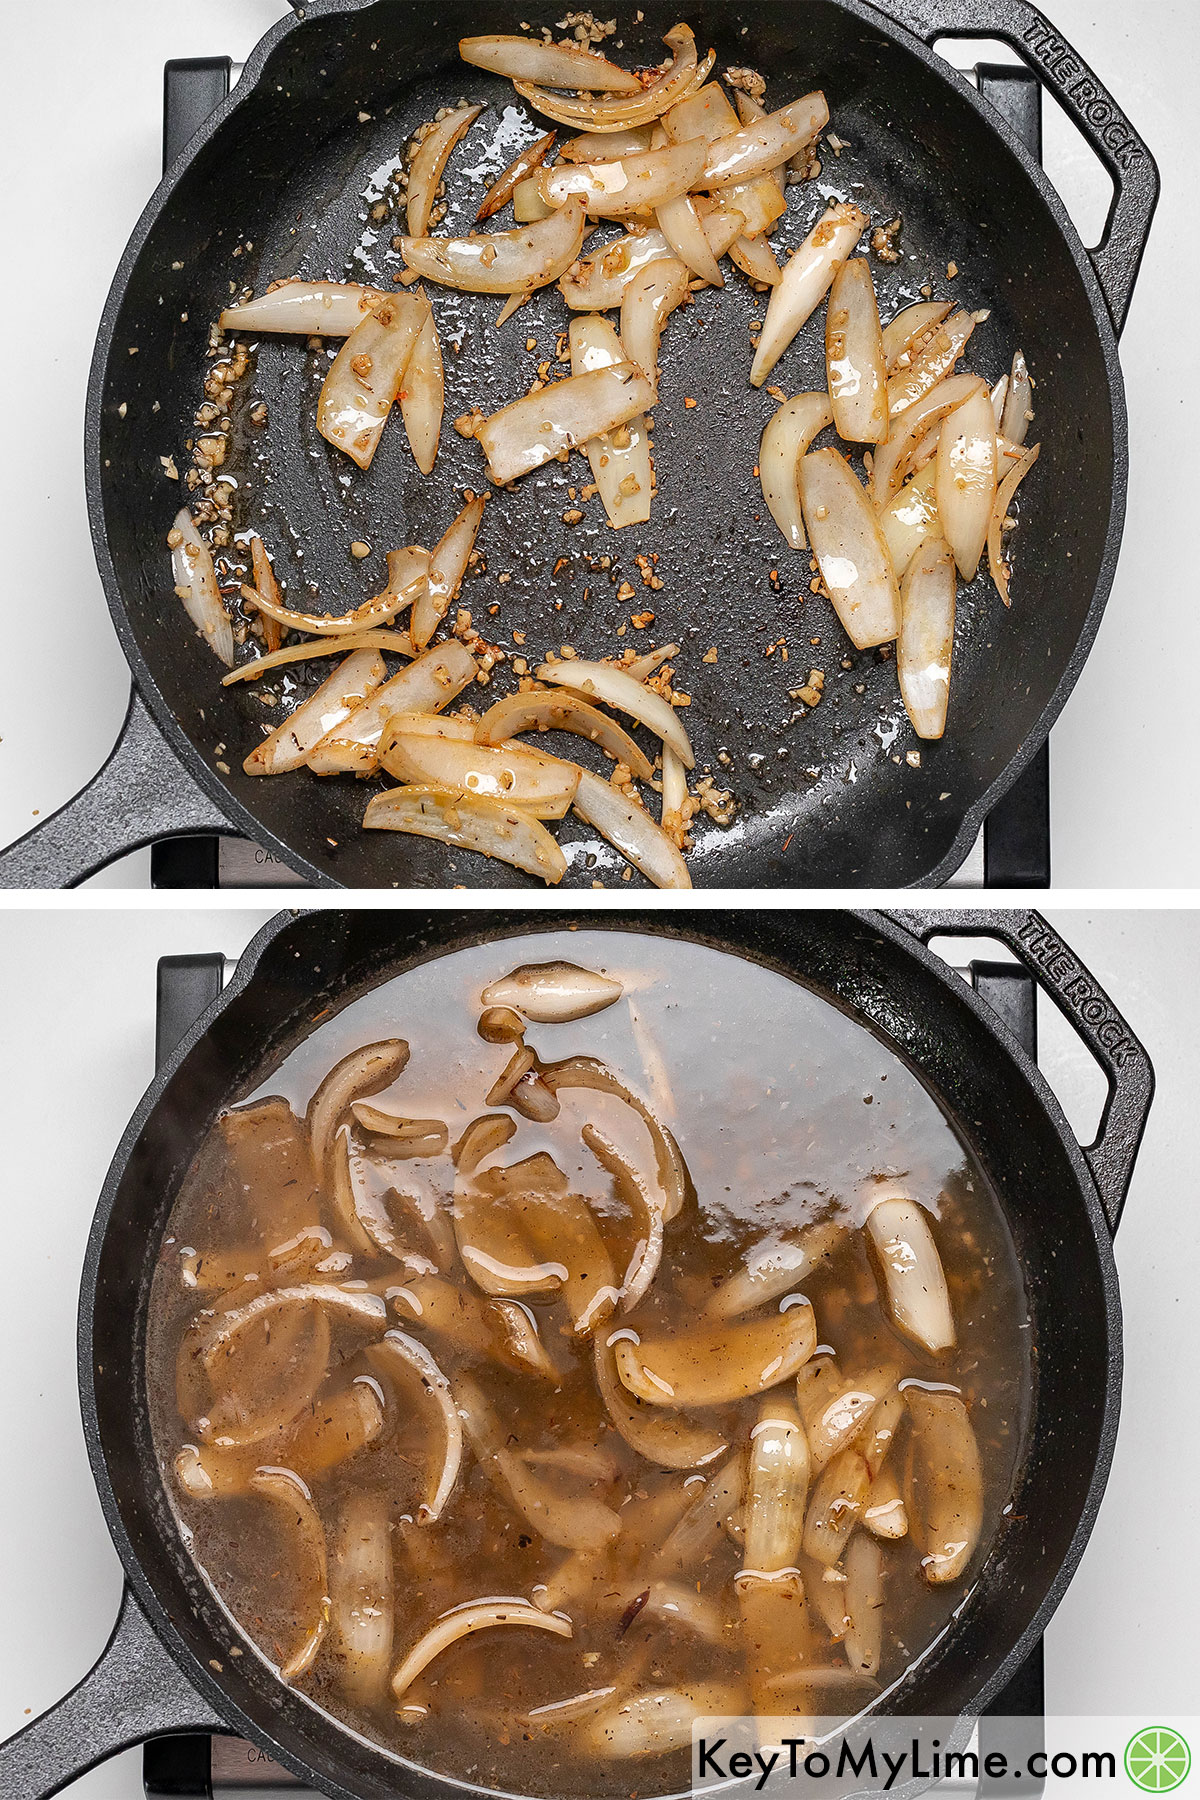 Sauteing onions in a hot skillet until softened, and then adding chicken broth to the pan.